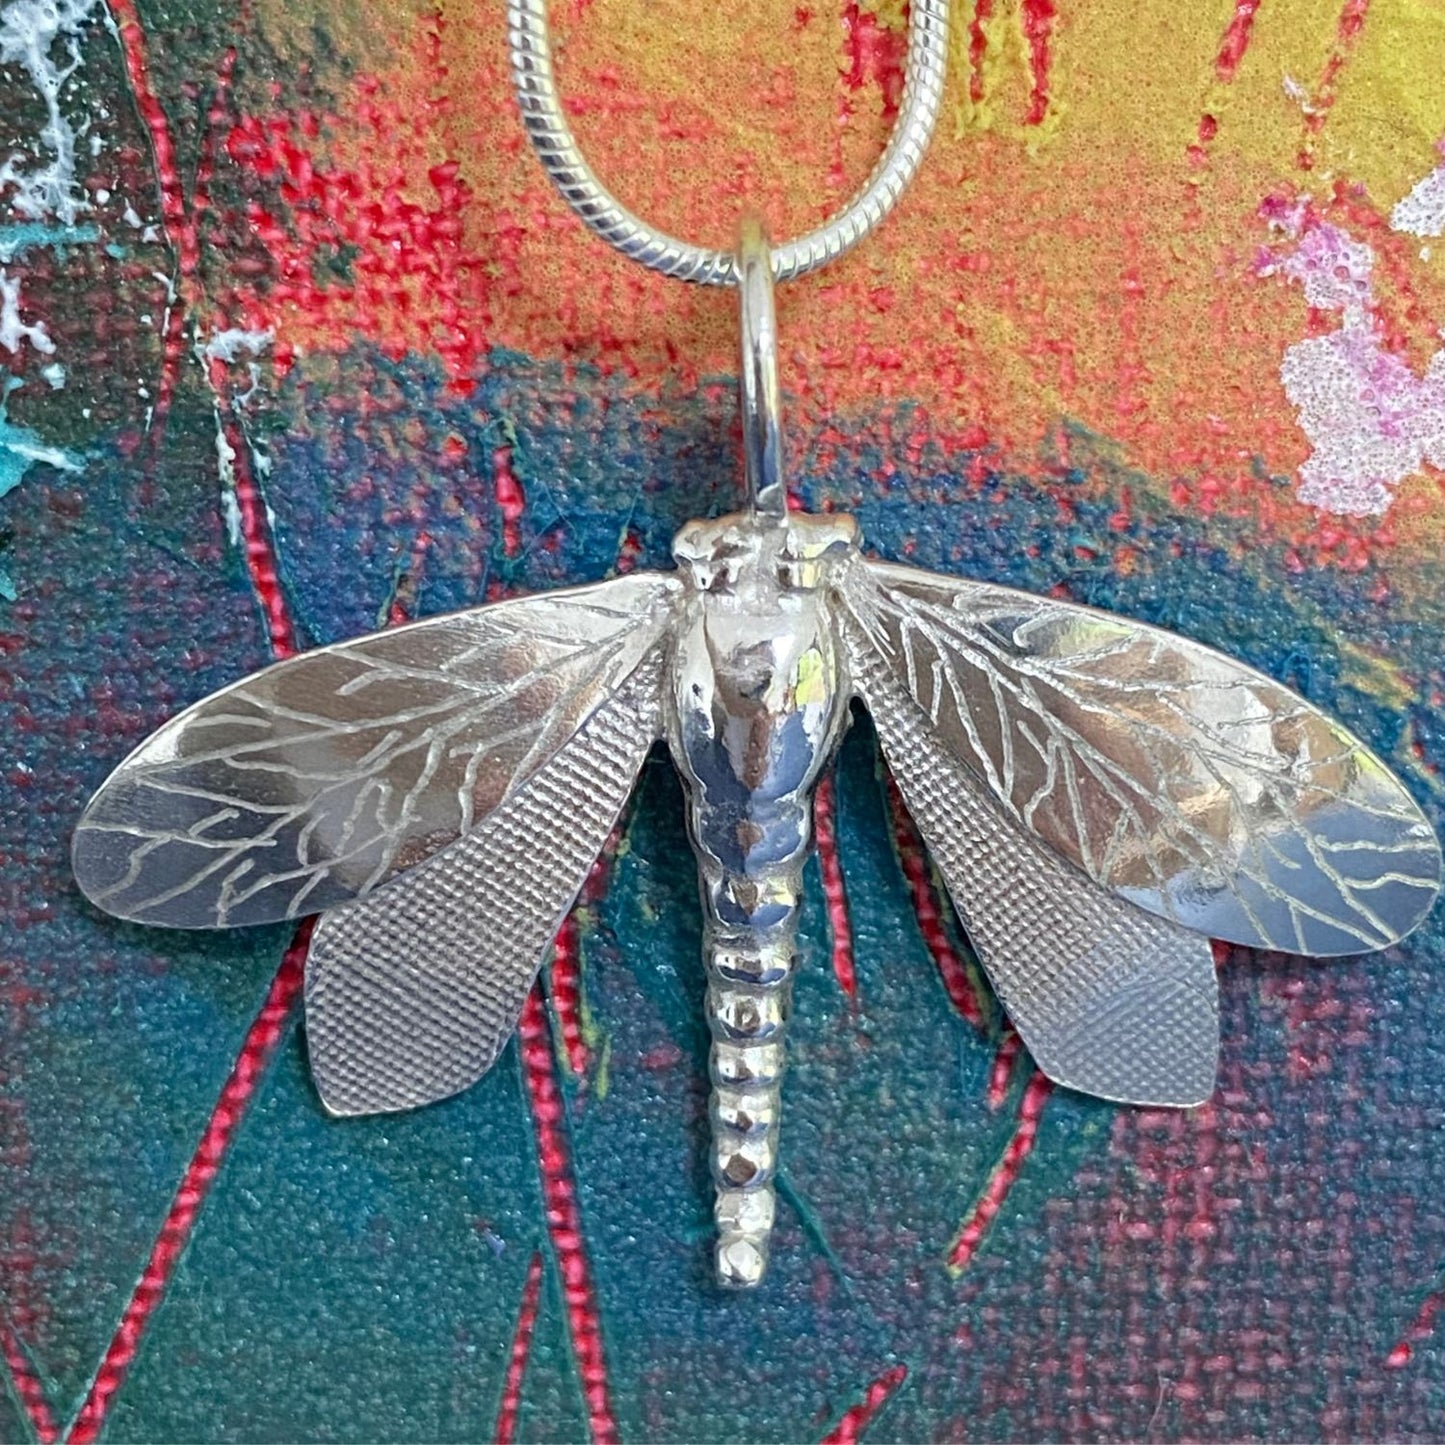 Handmade Silver Dragonfly Necklace-dragonfly pendant-large dragonfly necklace